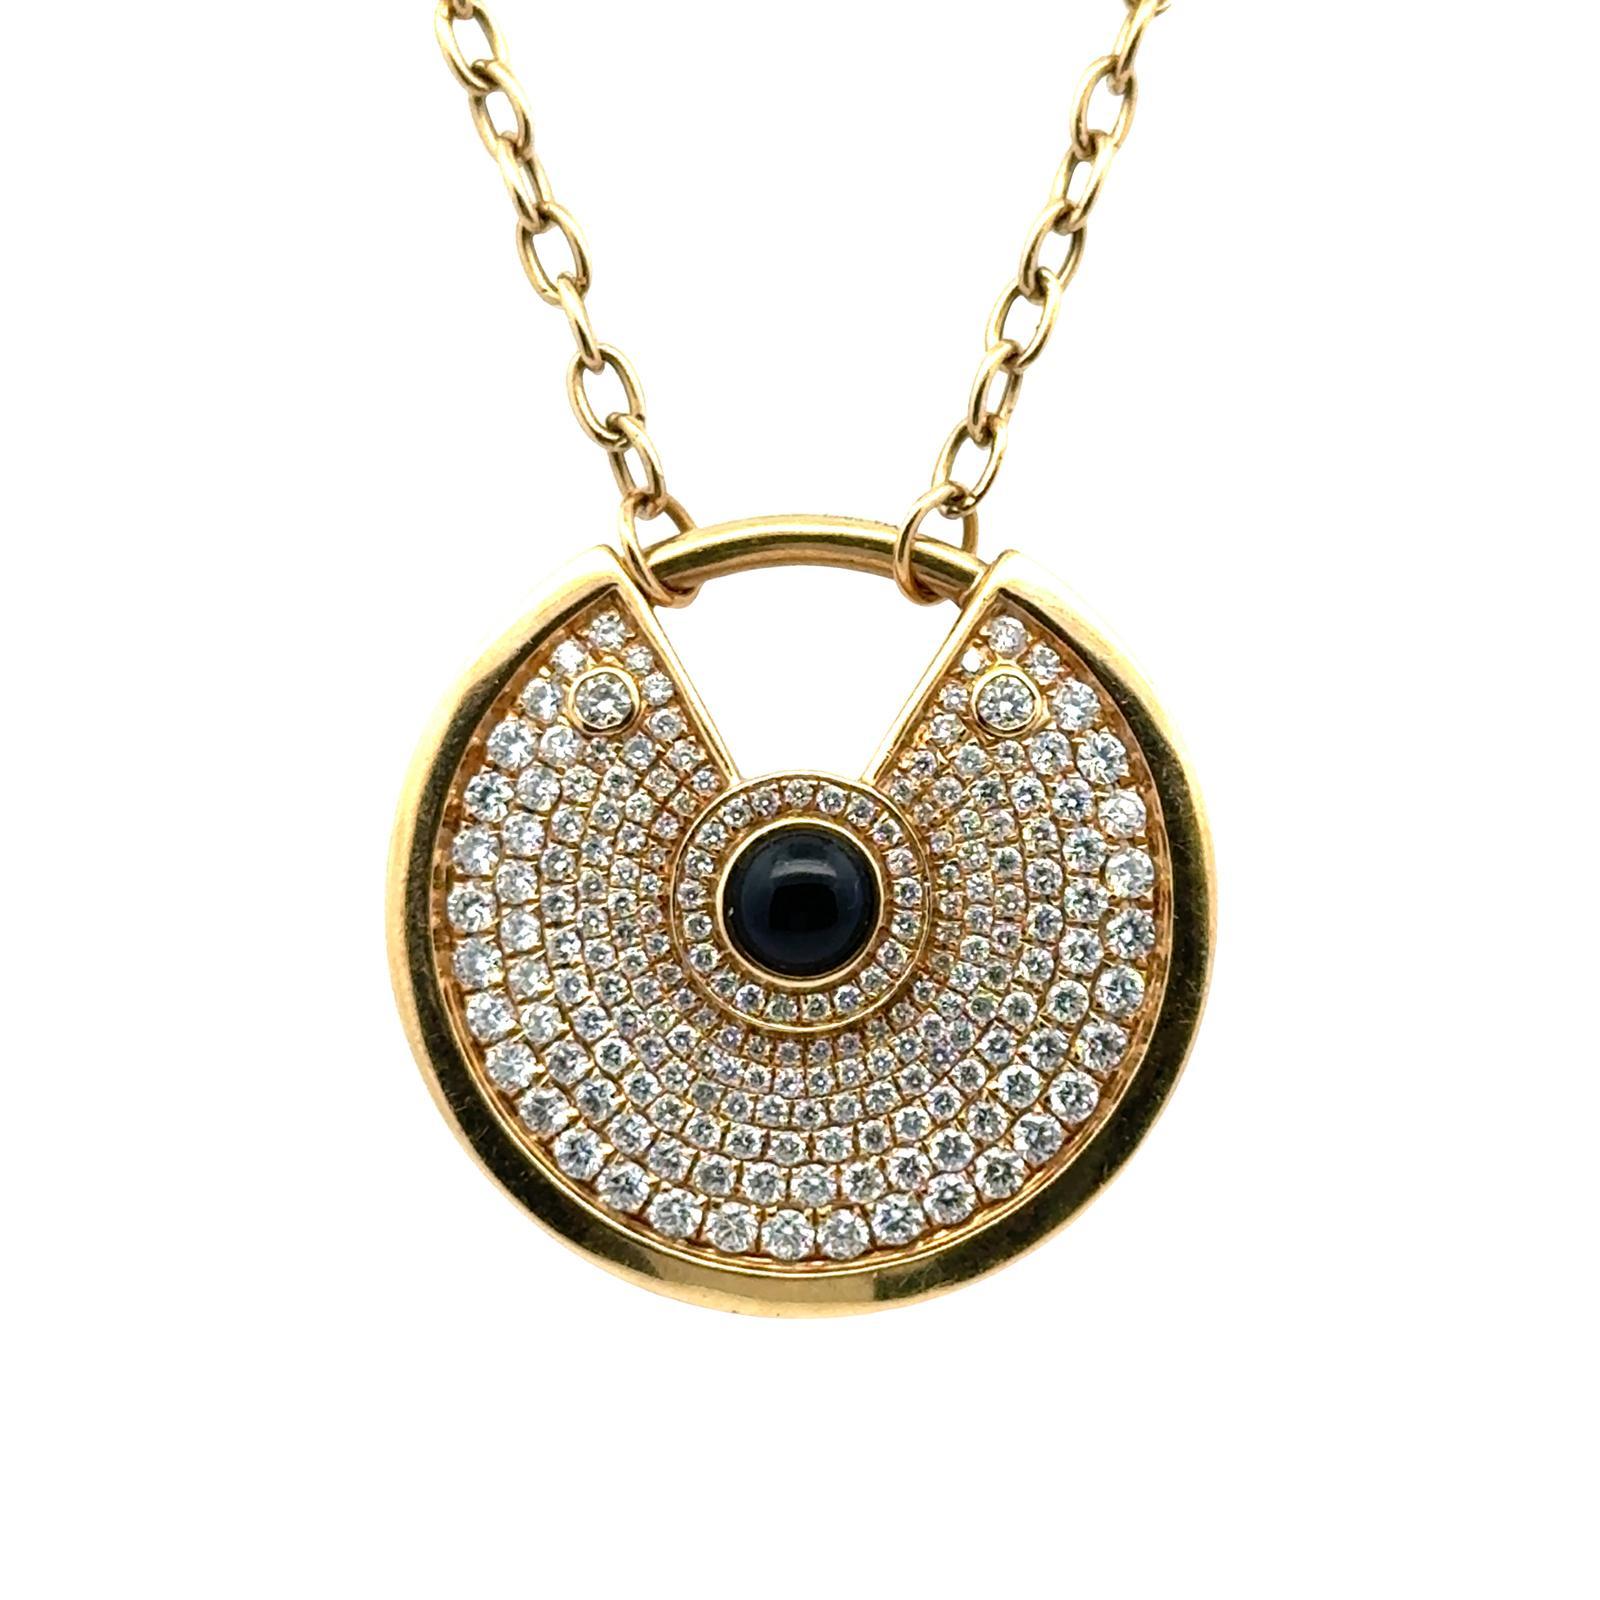 Modern Diamond Cabochon Onyx 18 Karat Yellow Gold Amulette Pendant Necklace In Excellent Condition For Sale In Boca Raton, FL